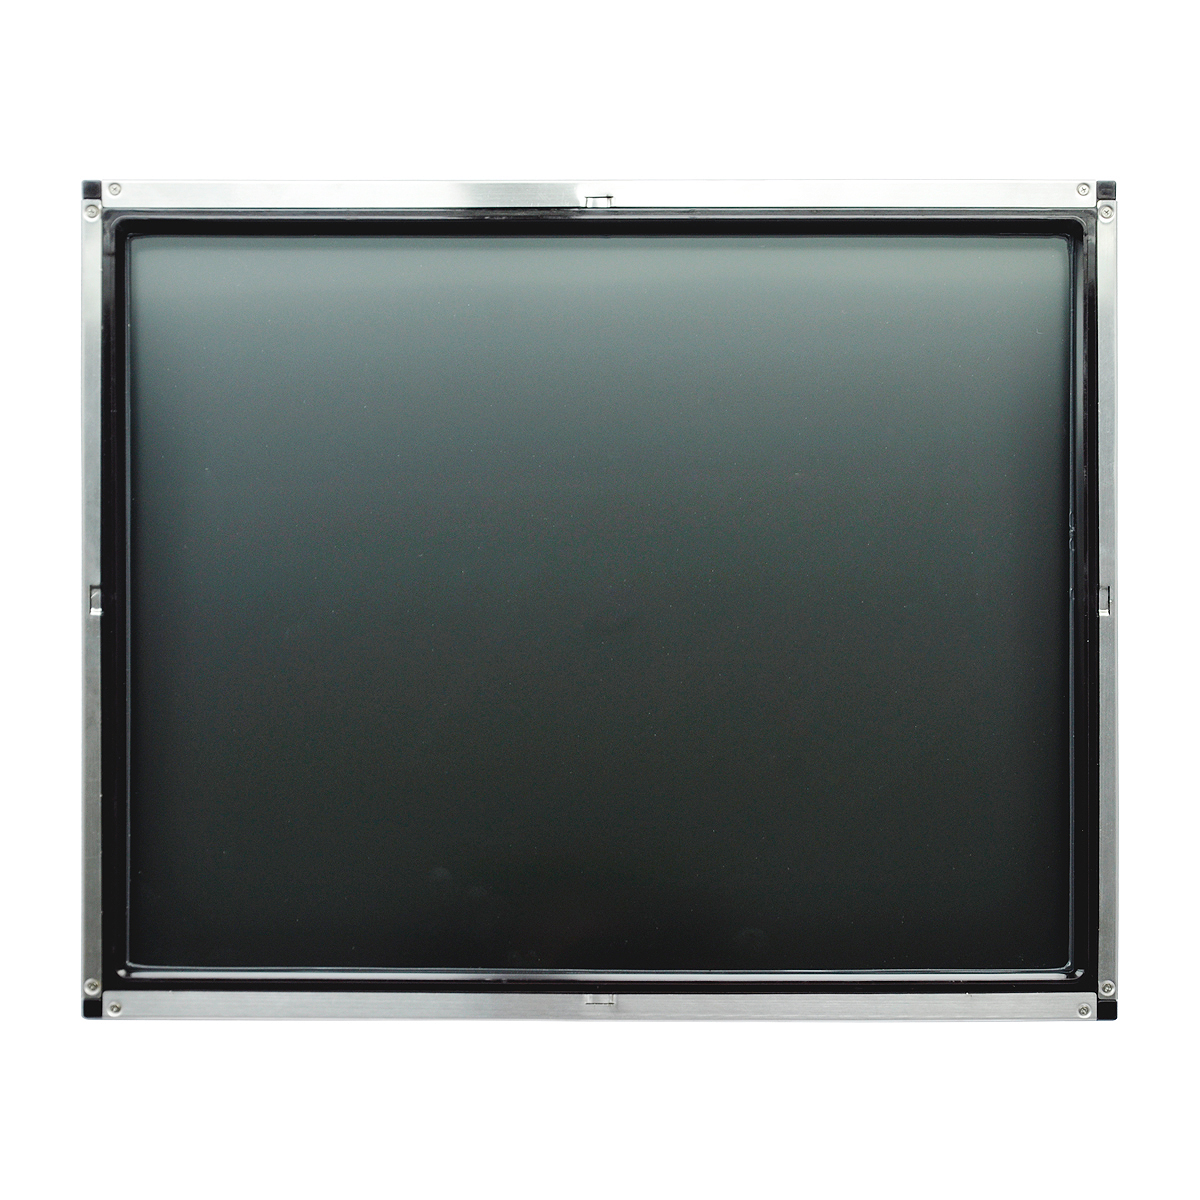 17-19 inch High Brightness Touch Monitor 